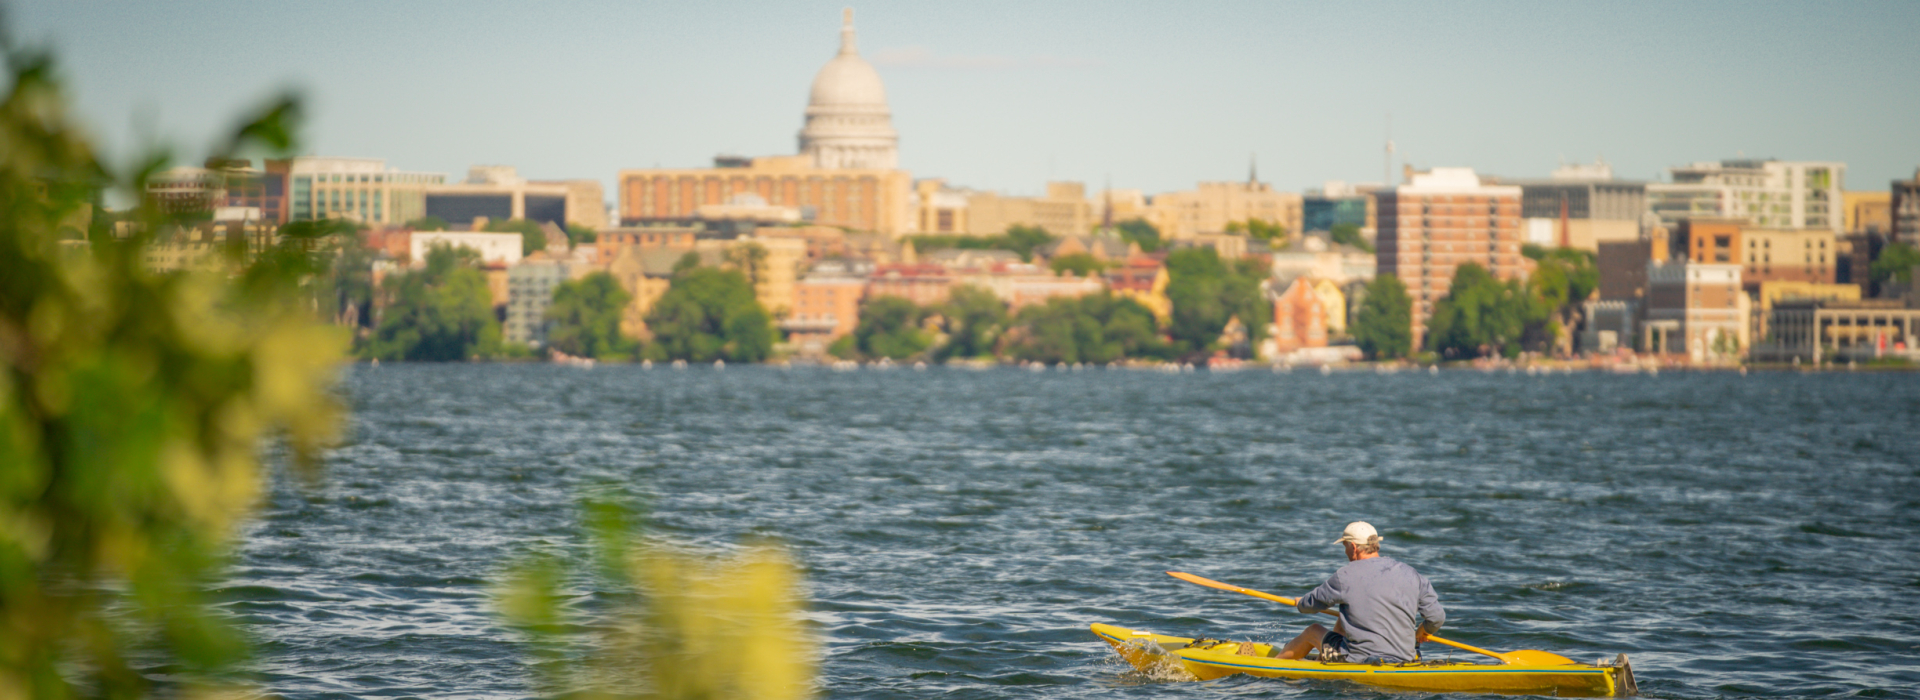 Man on kayak paddling lake Mendota with University of Wisconsin campus and Capitol building in background